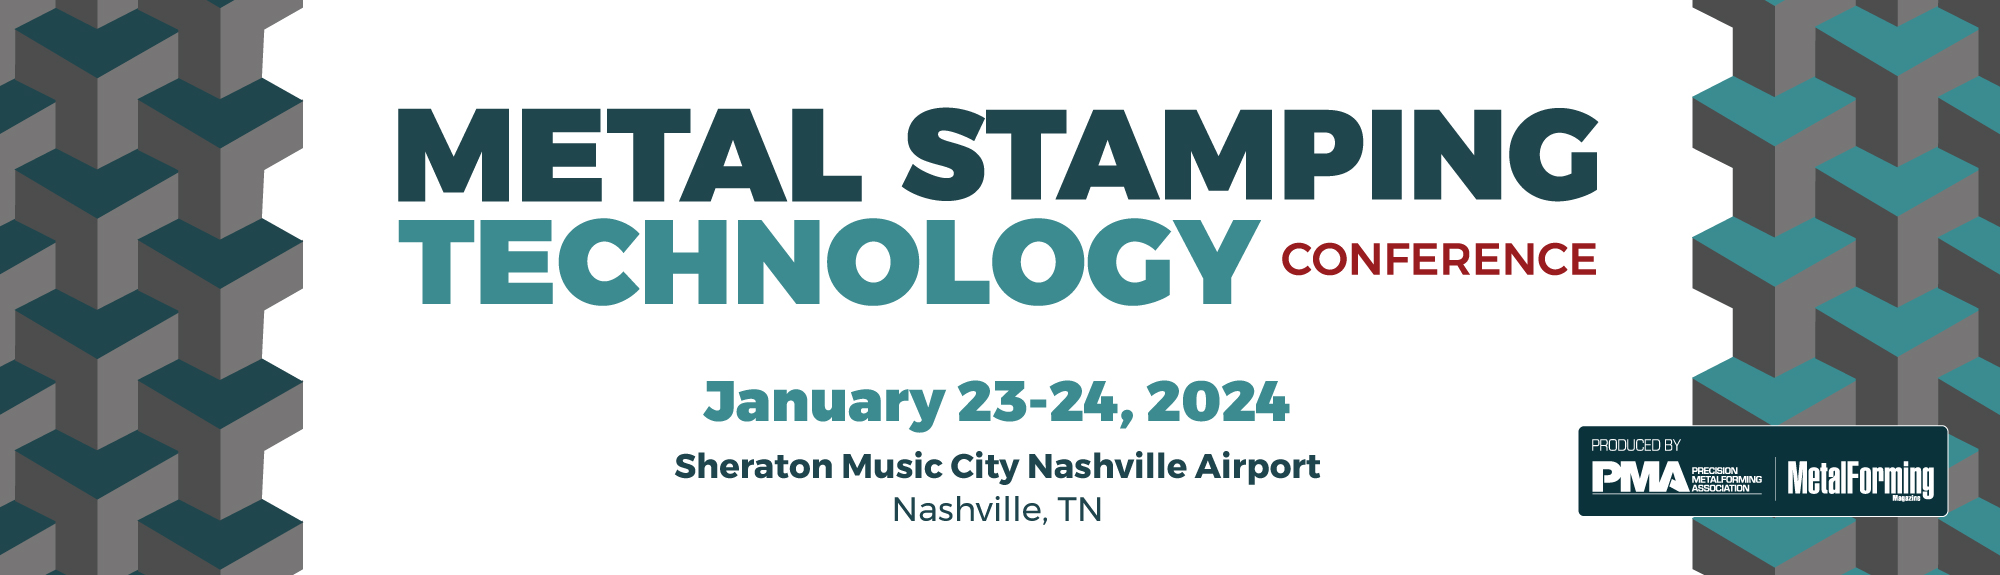 Metal Stamping Technology Conference